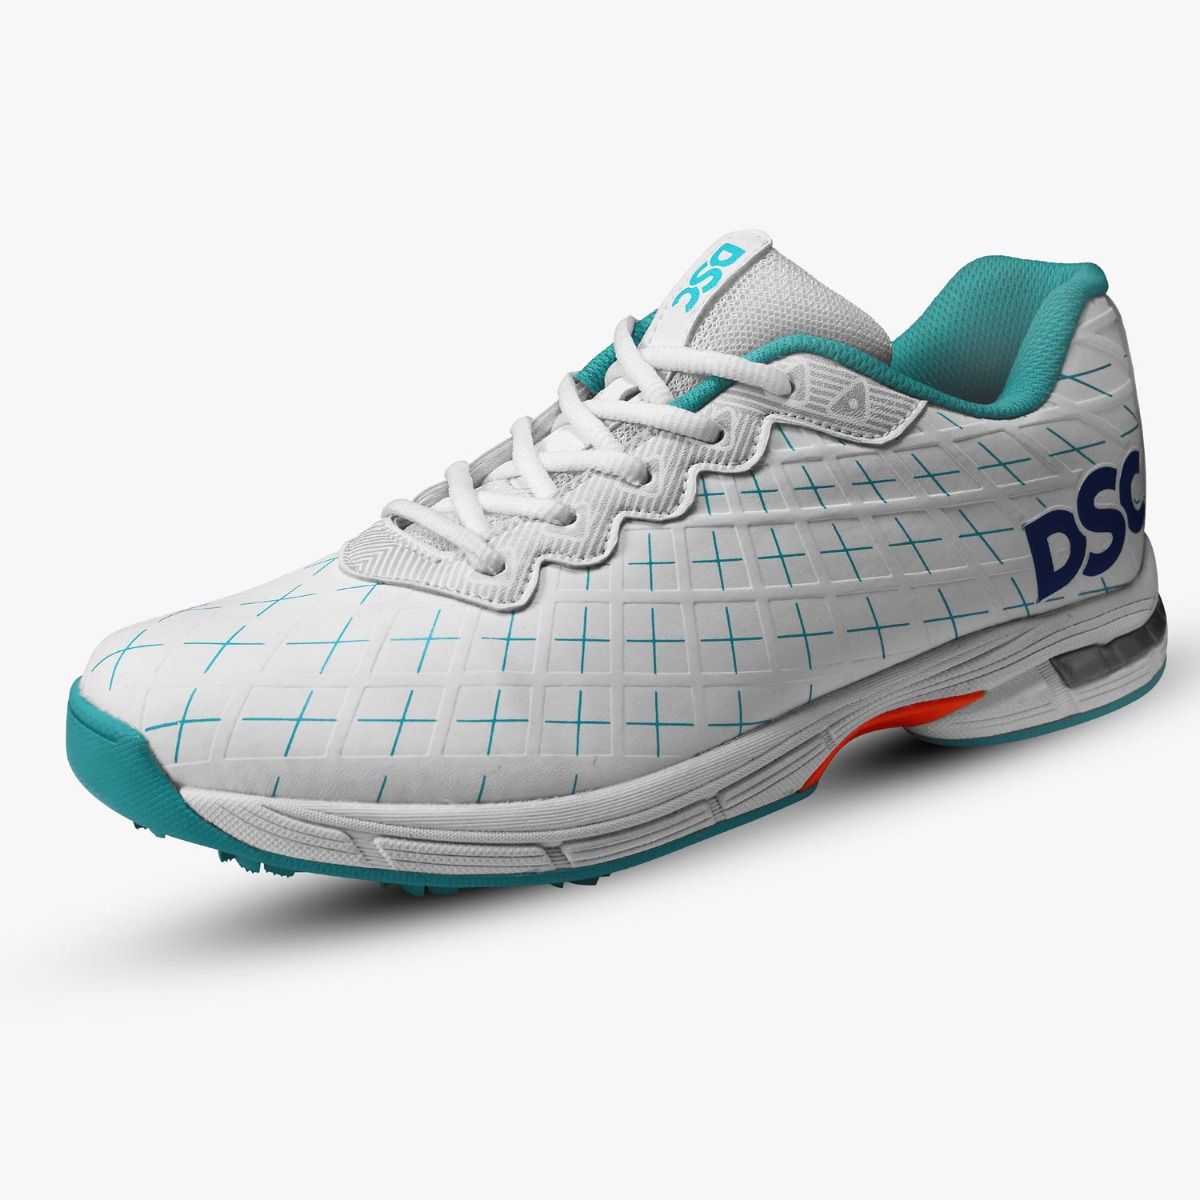 Biffer 22 Cricket Shoes